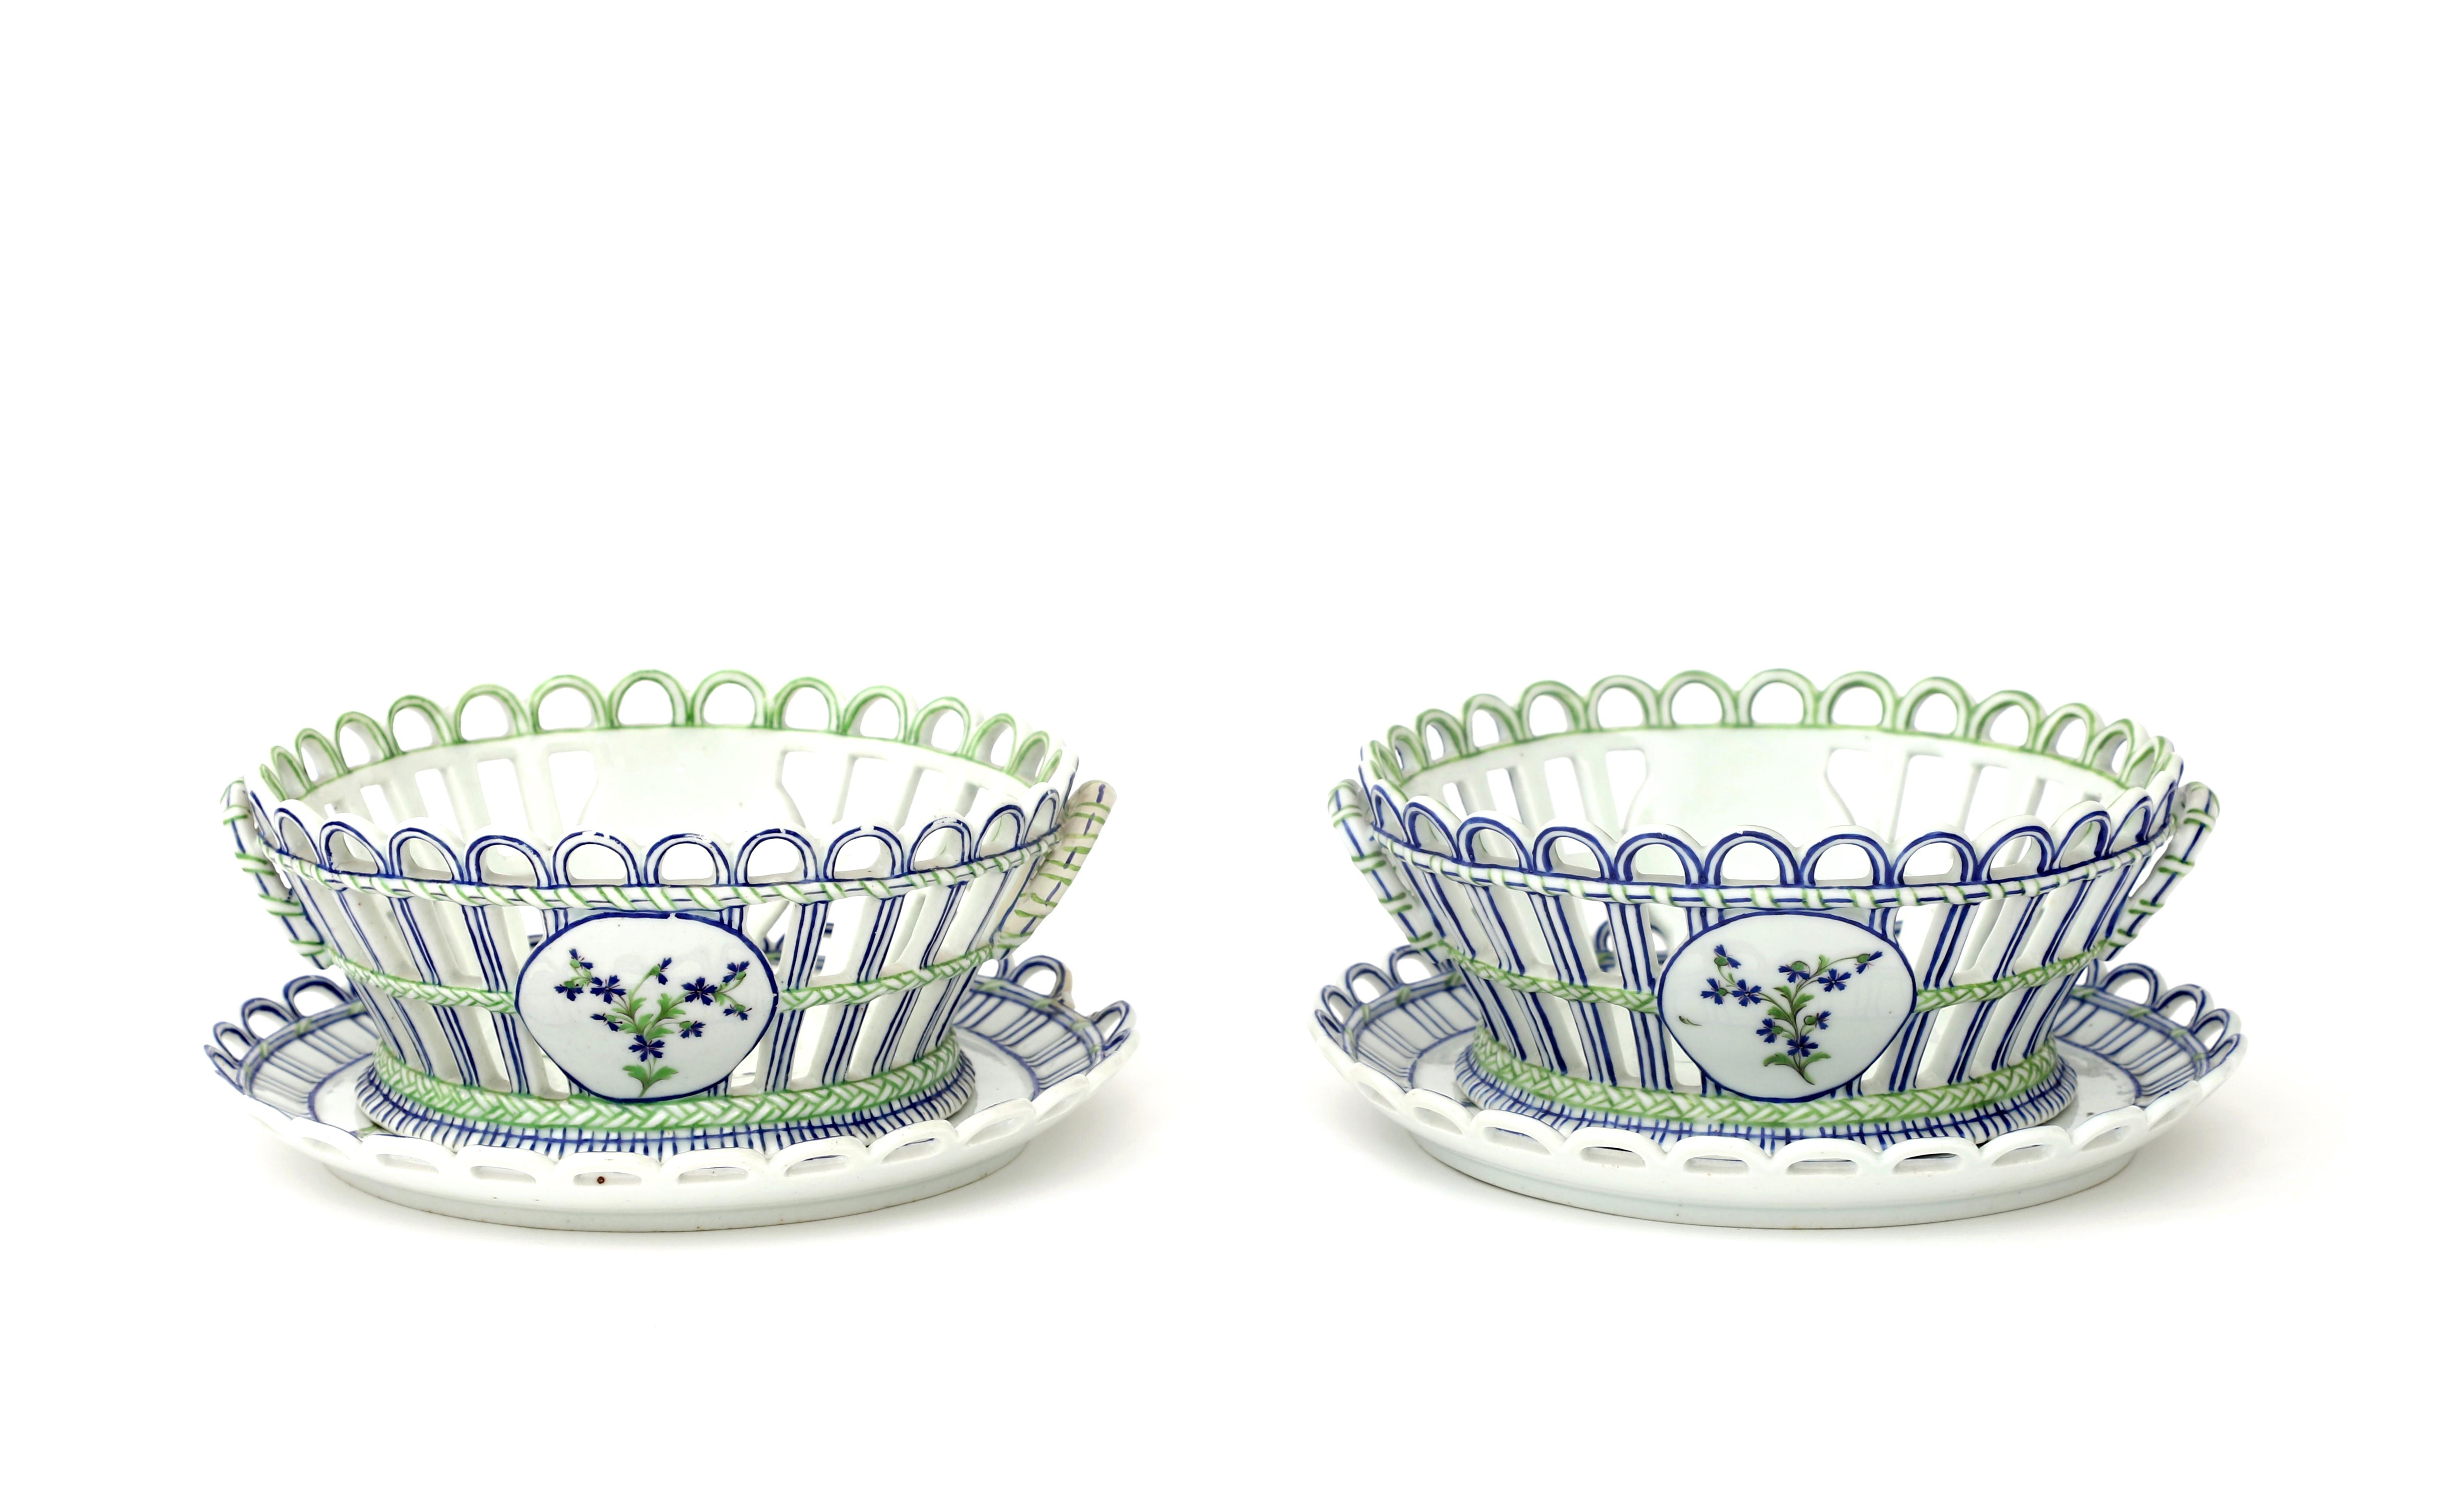 Two porcelain round baskets (nut baskets) with stand, Niderviller (Germany: Niederweiler),